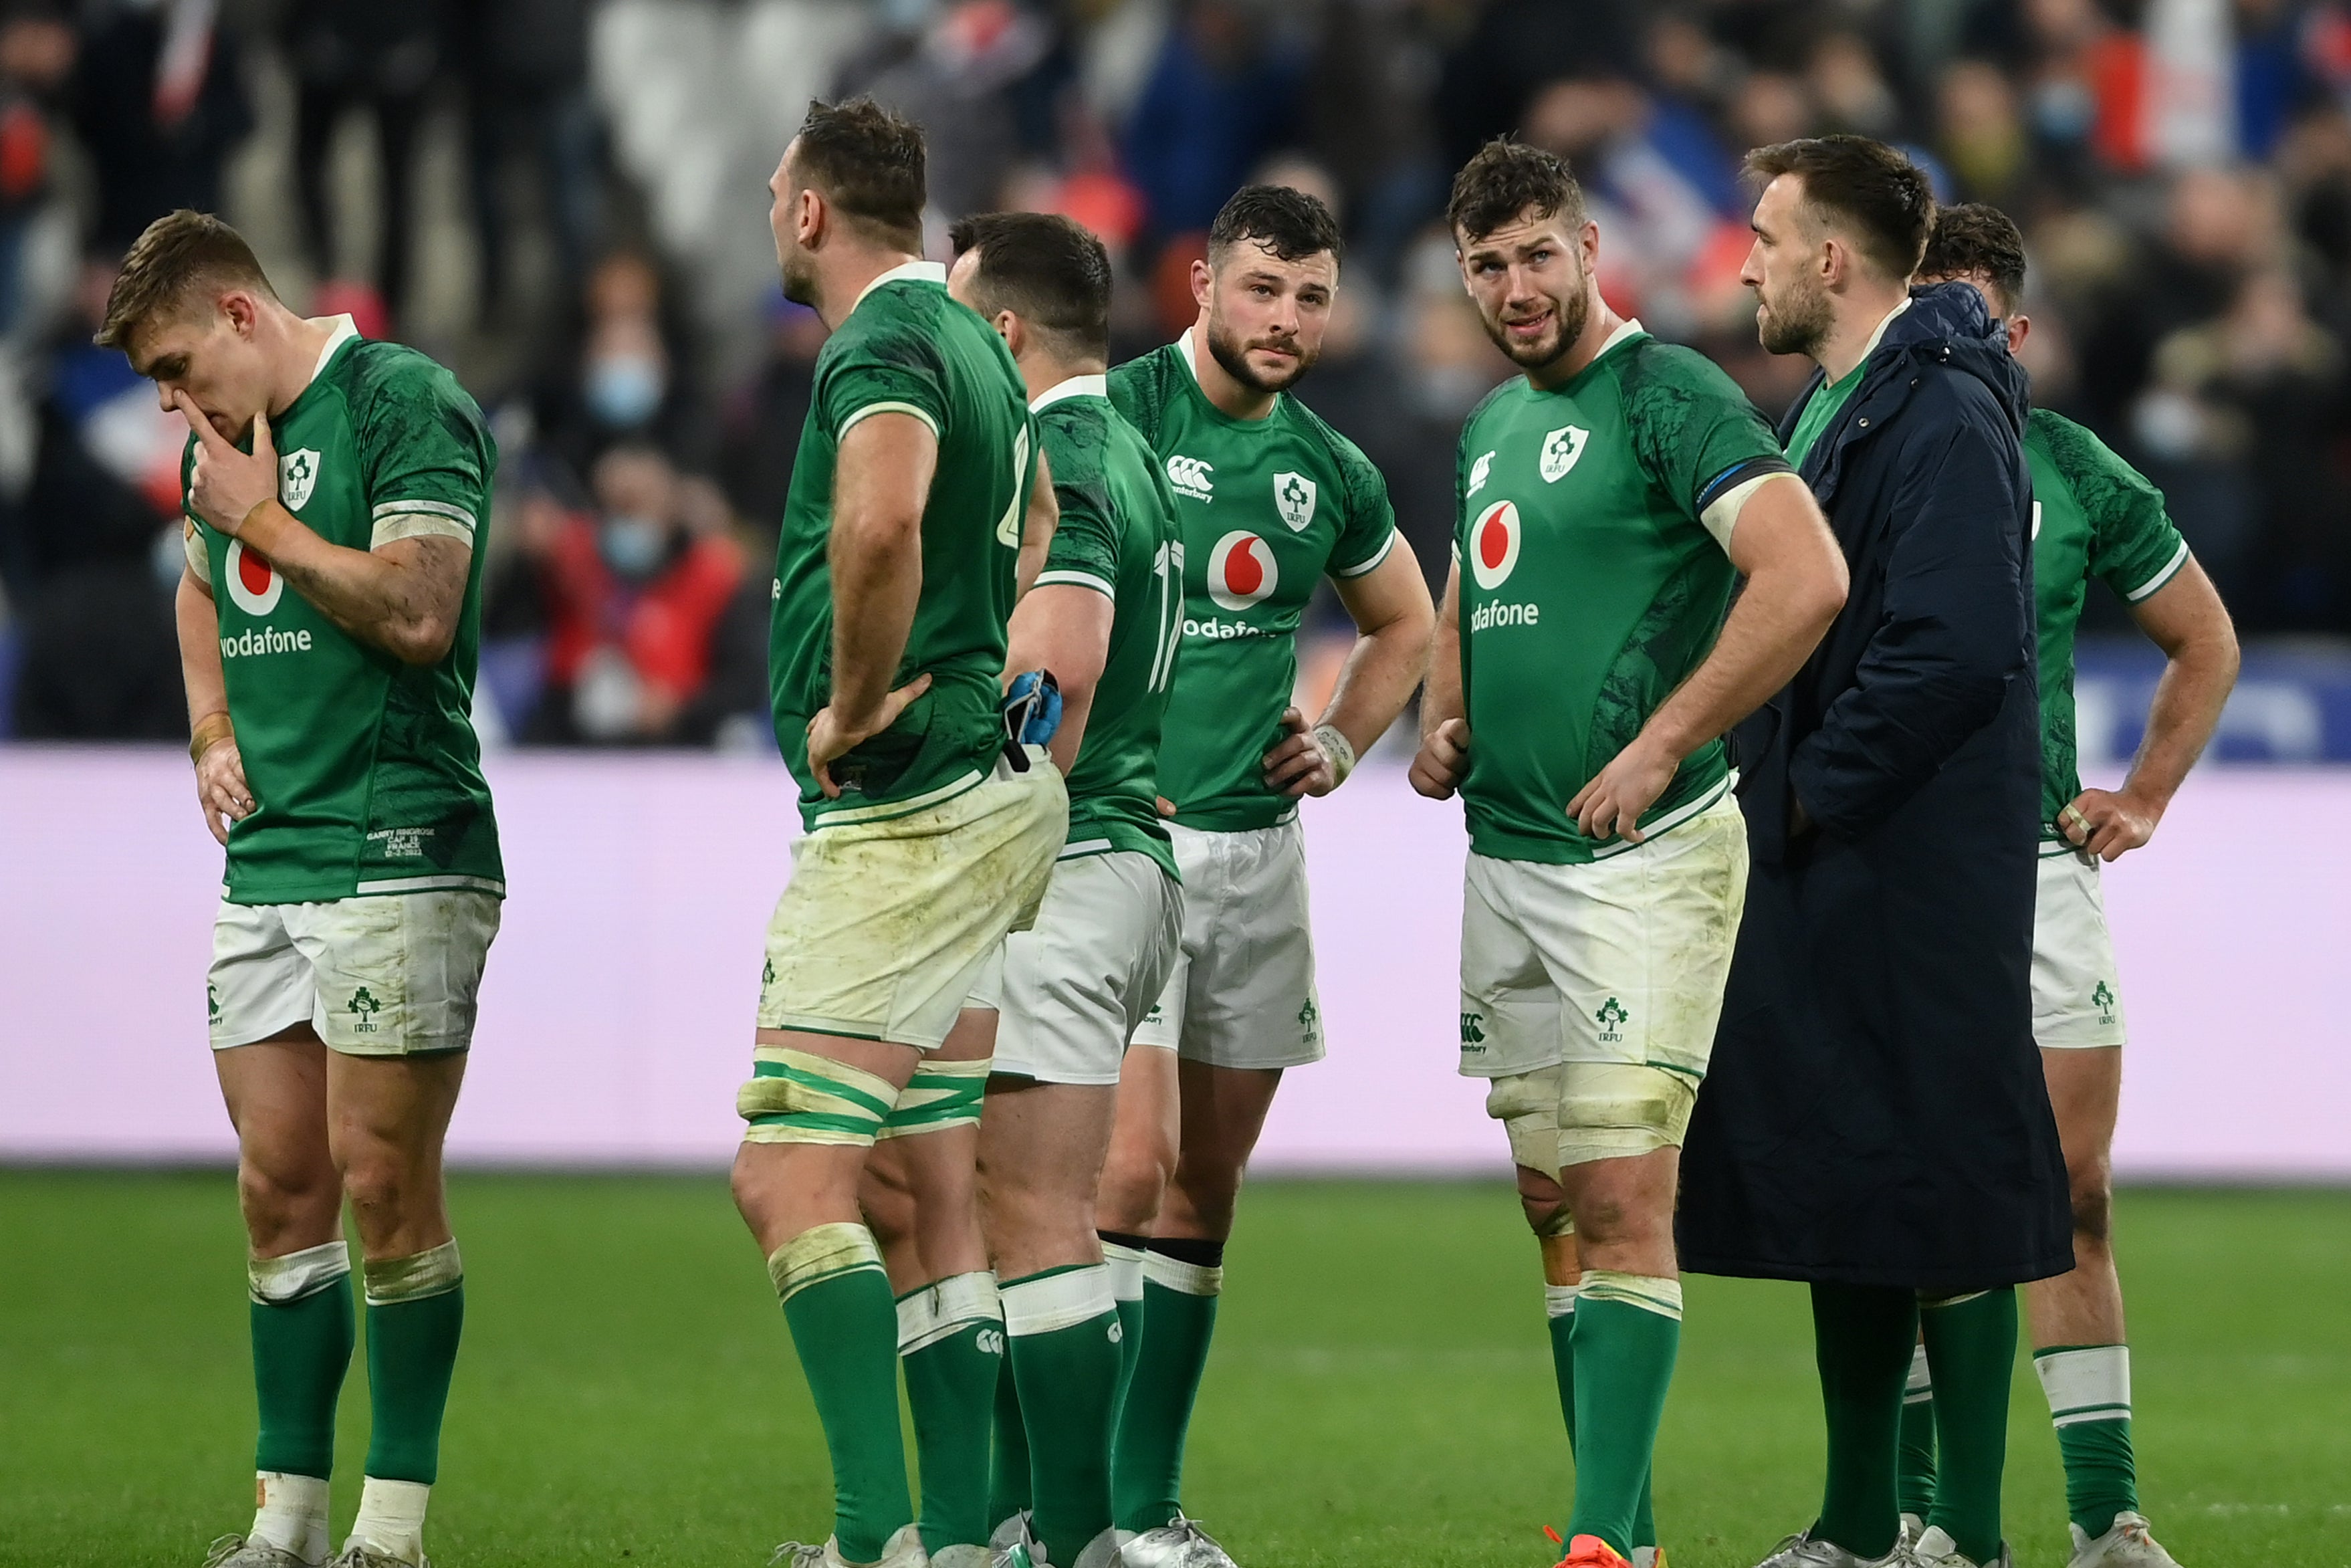 Ireland will hope to end their World Cup woe in France